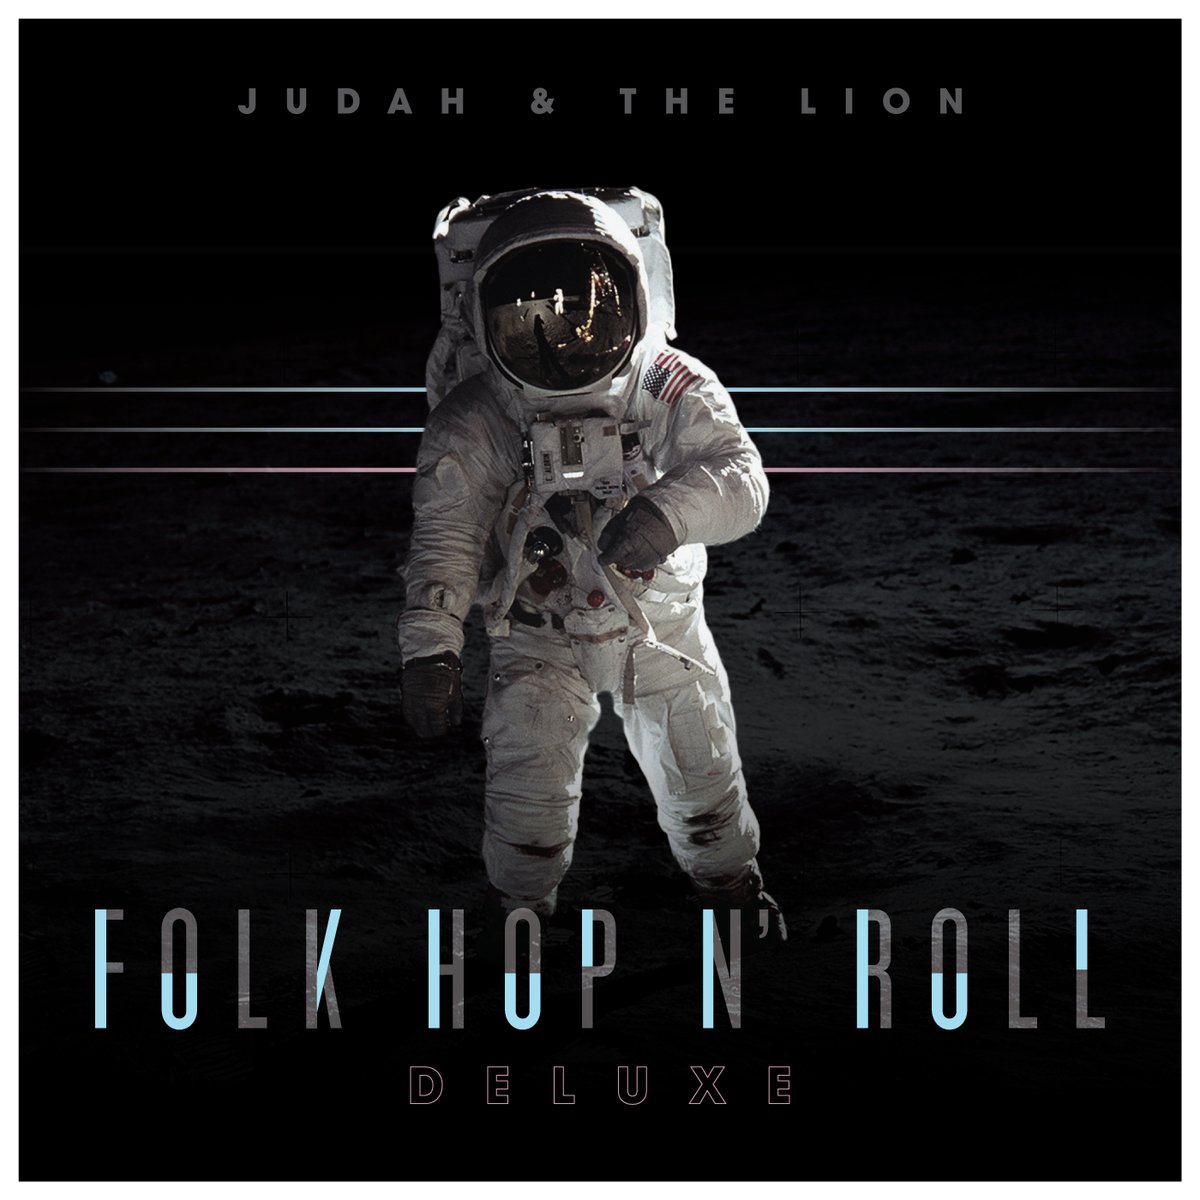 judah-and-the-lion-deluxe